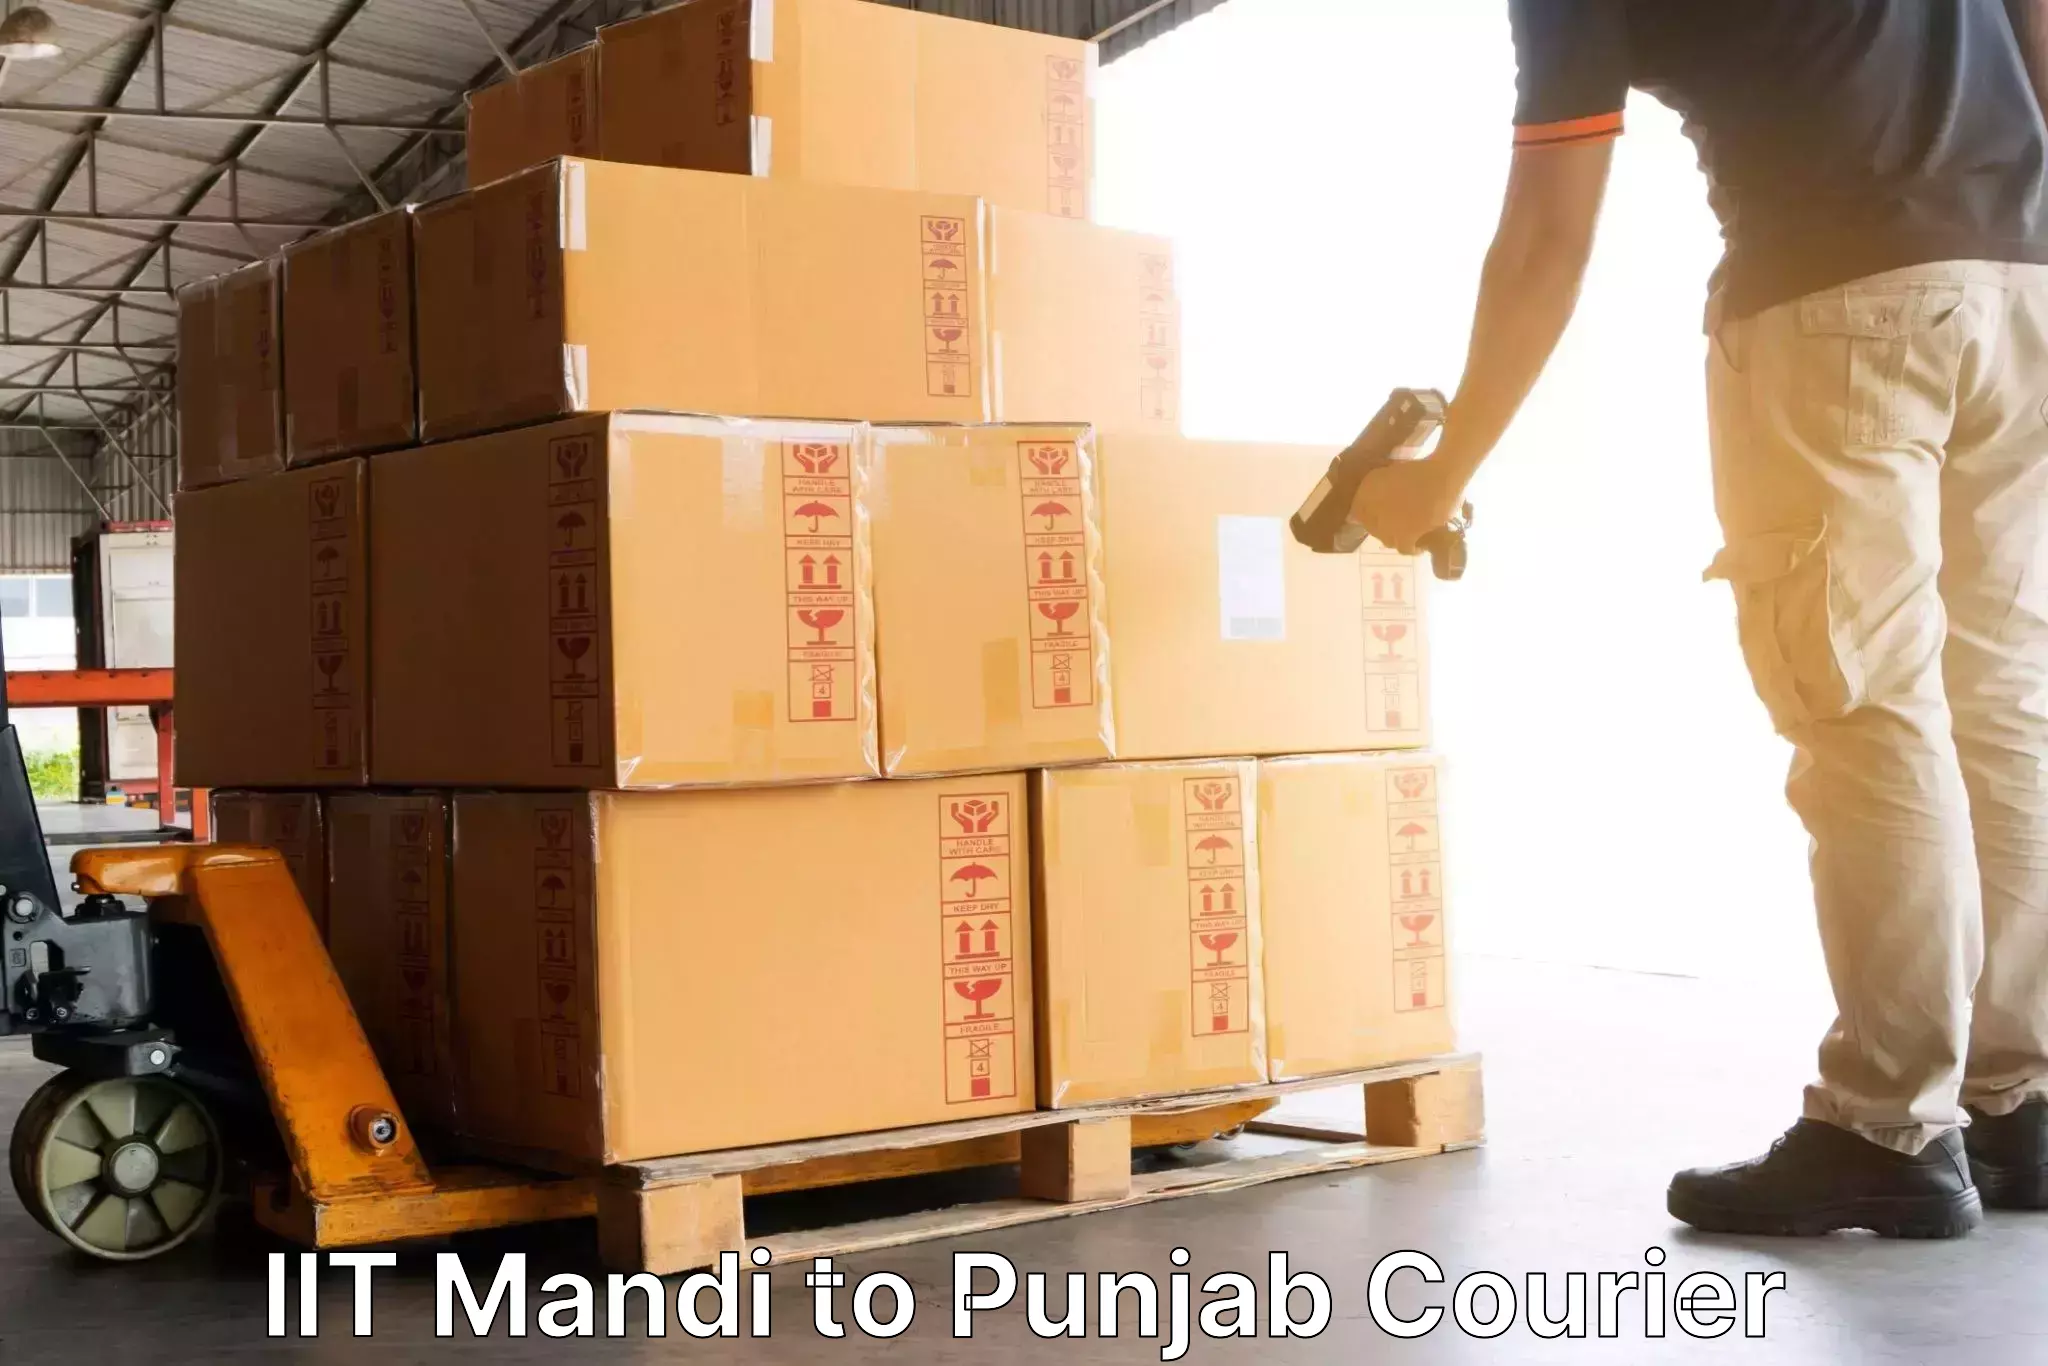 Customer-friendly courier services IIT Mandi to Amritsar